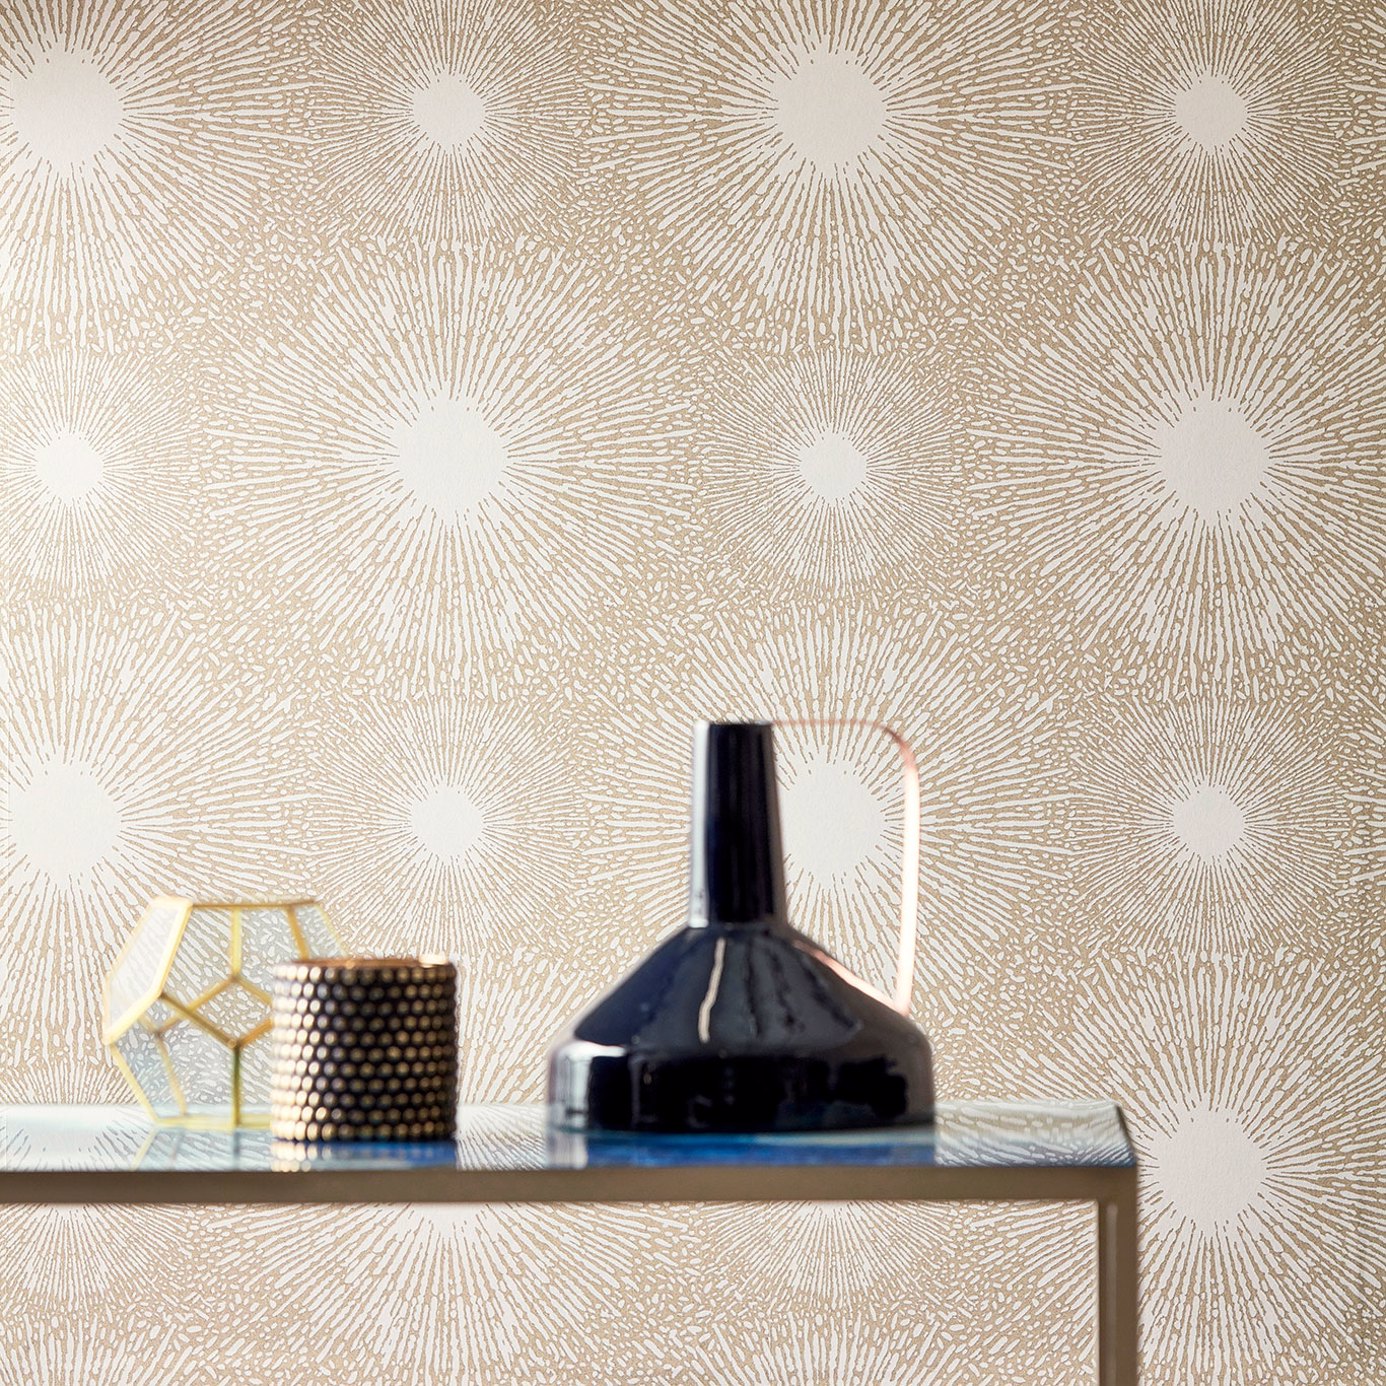 Anthology Perlite Gold Iridescent / Coal Wallpaper by HAR